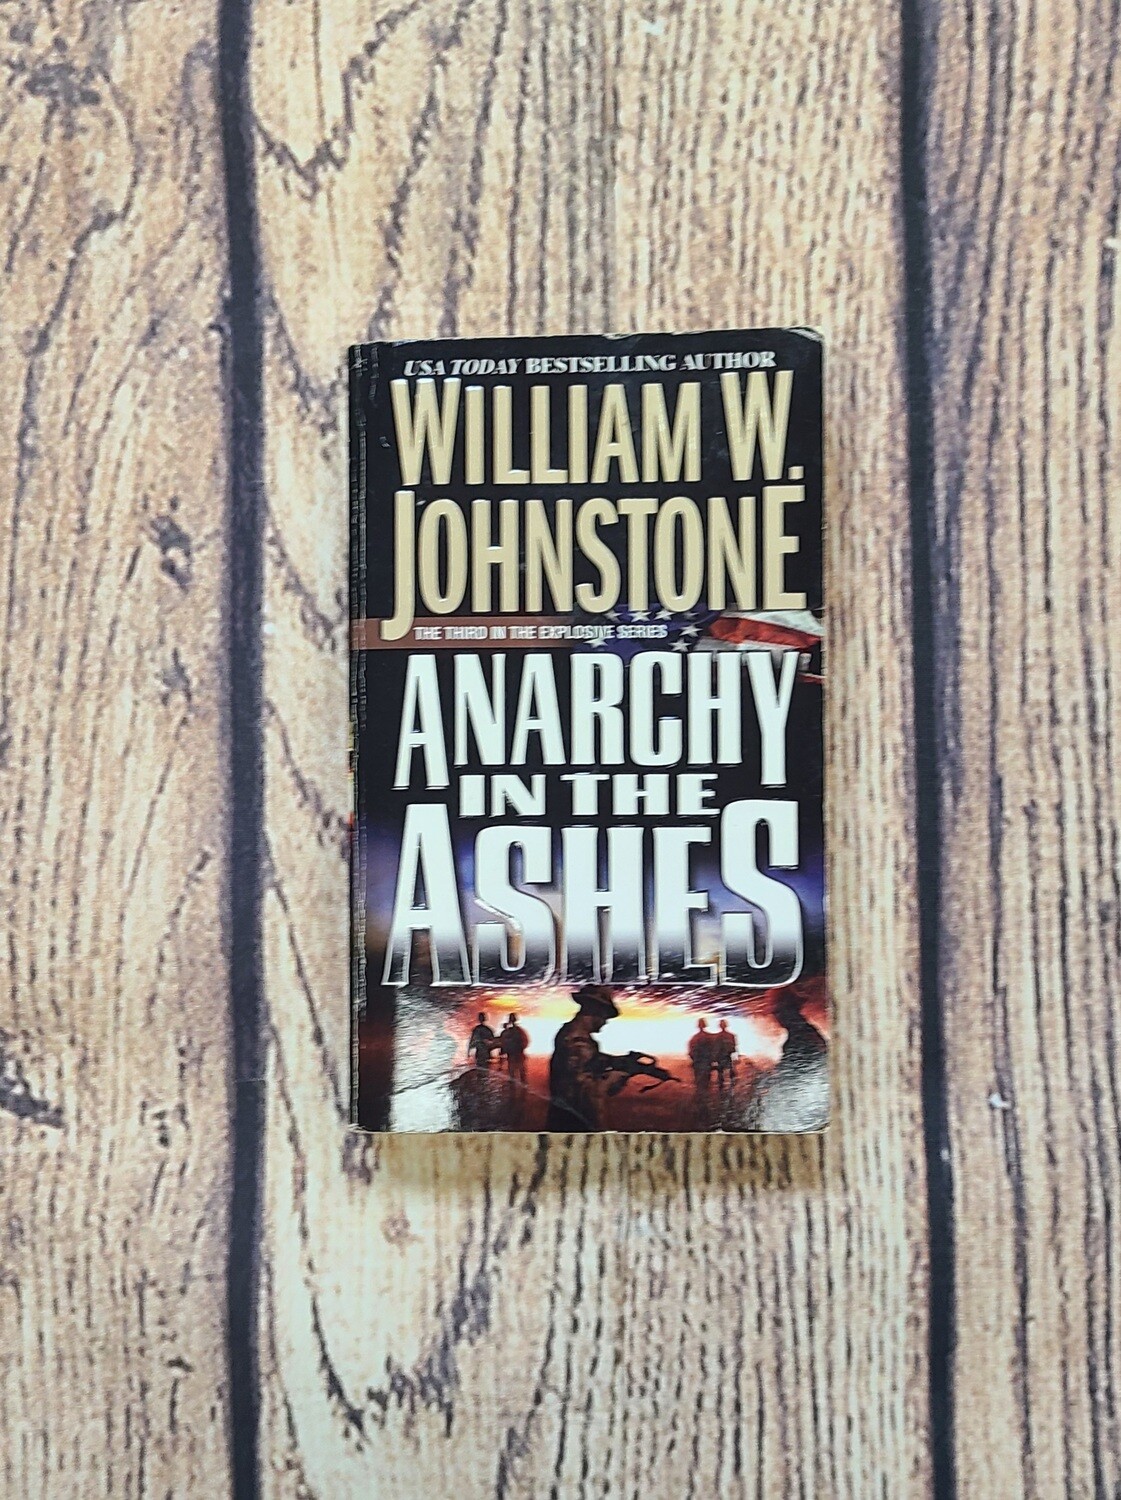 Anarchy in the Ashes by William W. Johnstone